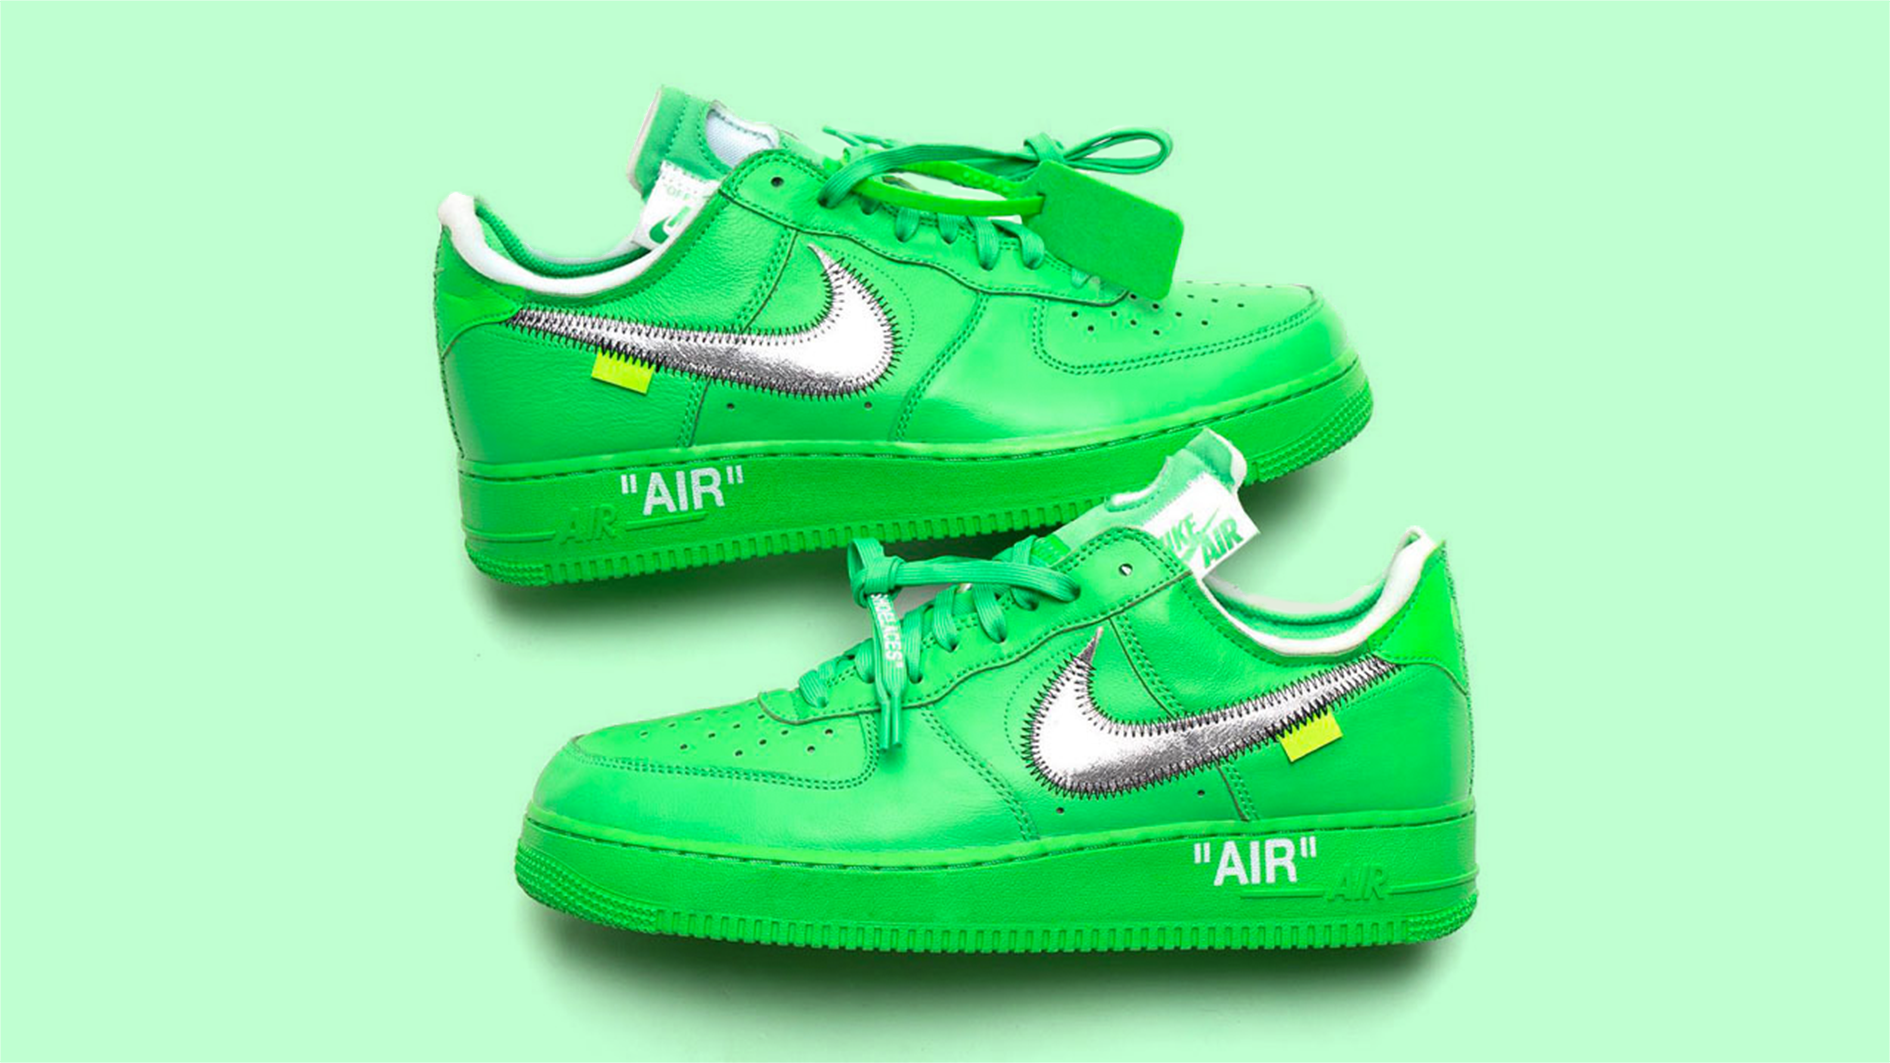 Nike Athlete Mysteriously Receives Unreleased Off-White x Nike Air Force 1s